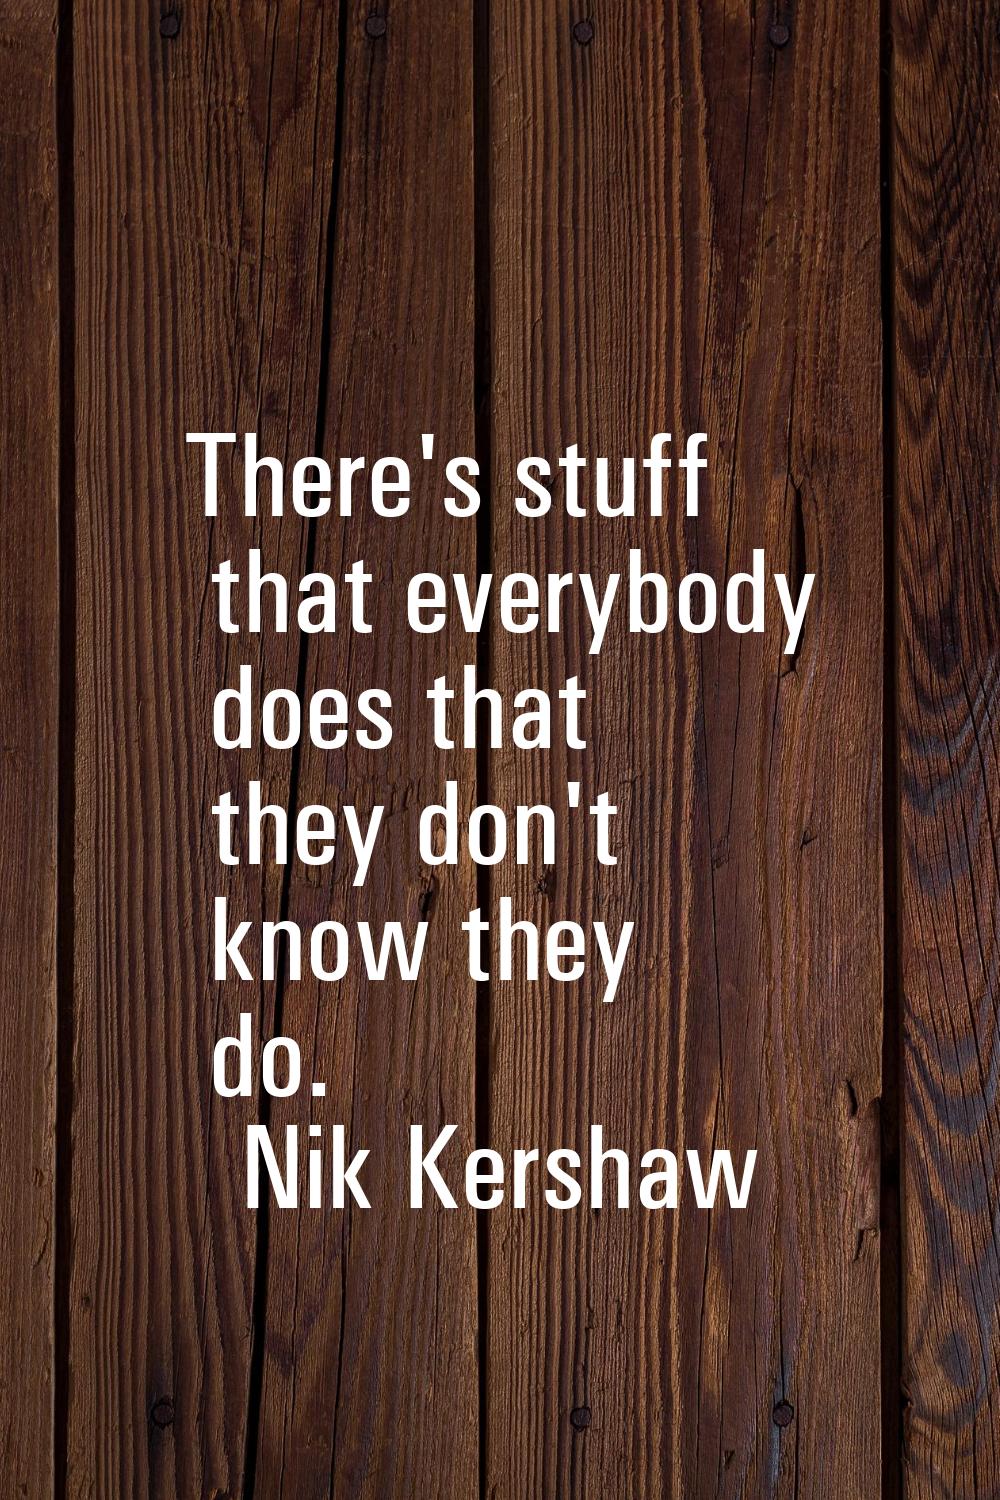 There's stuff that everybody does that they don't know they do.